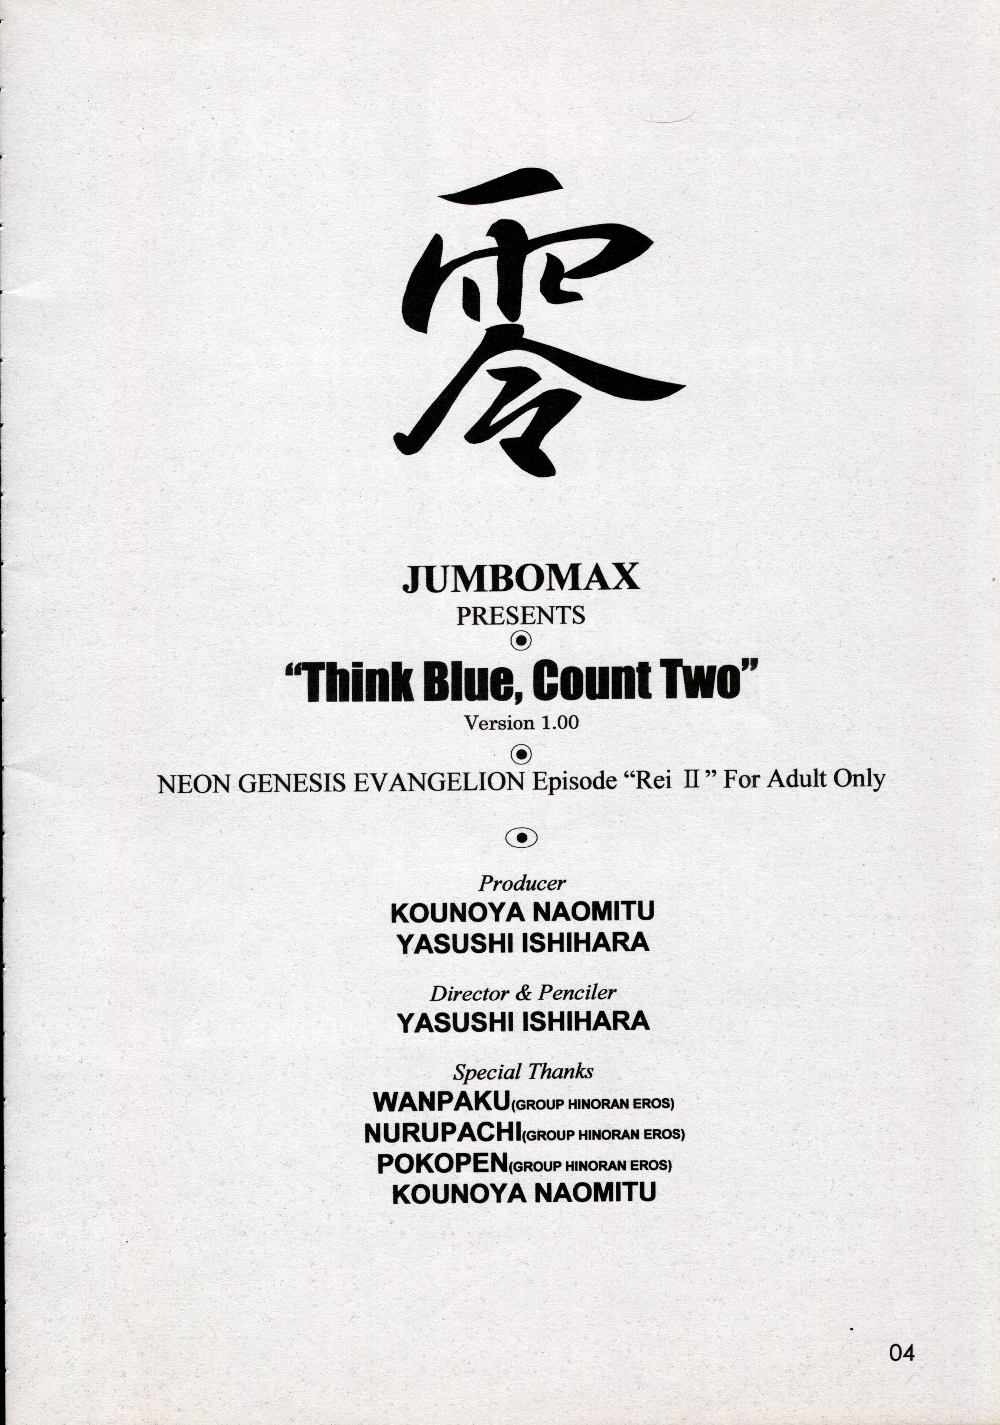 [Jumbomax] Think Blue Count Two 